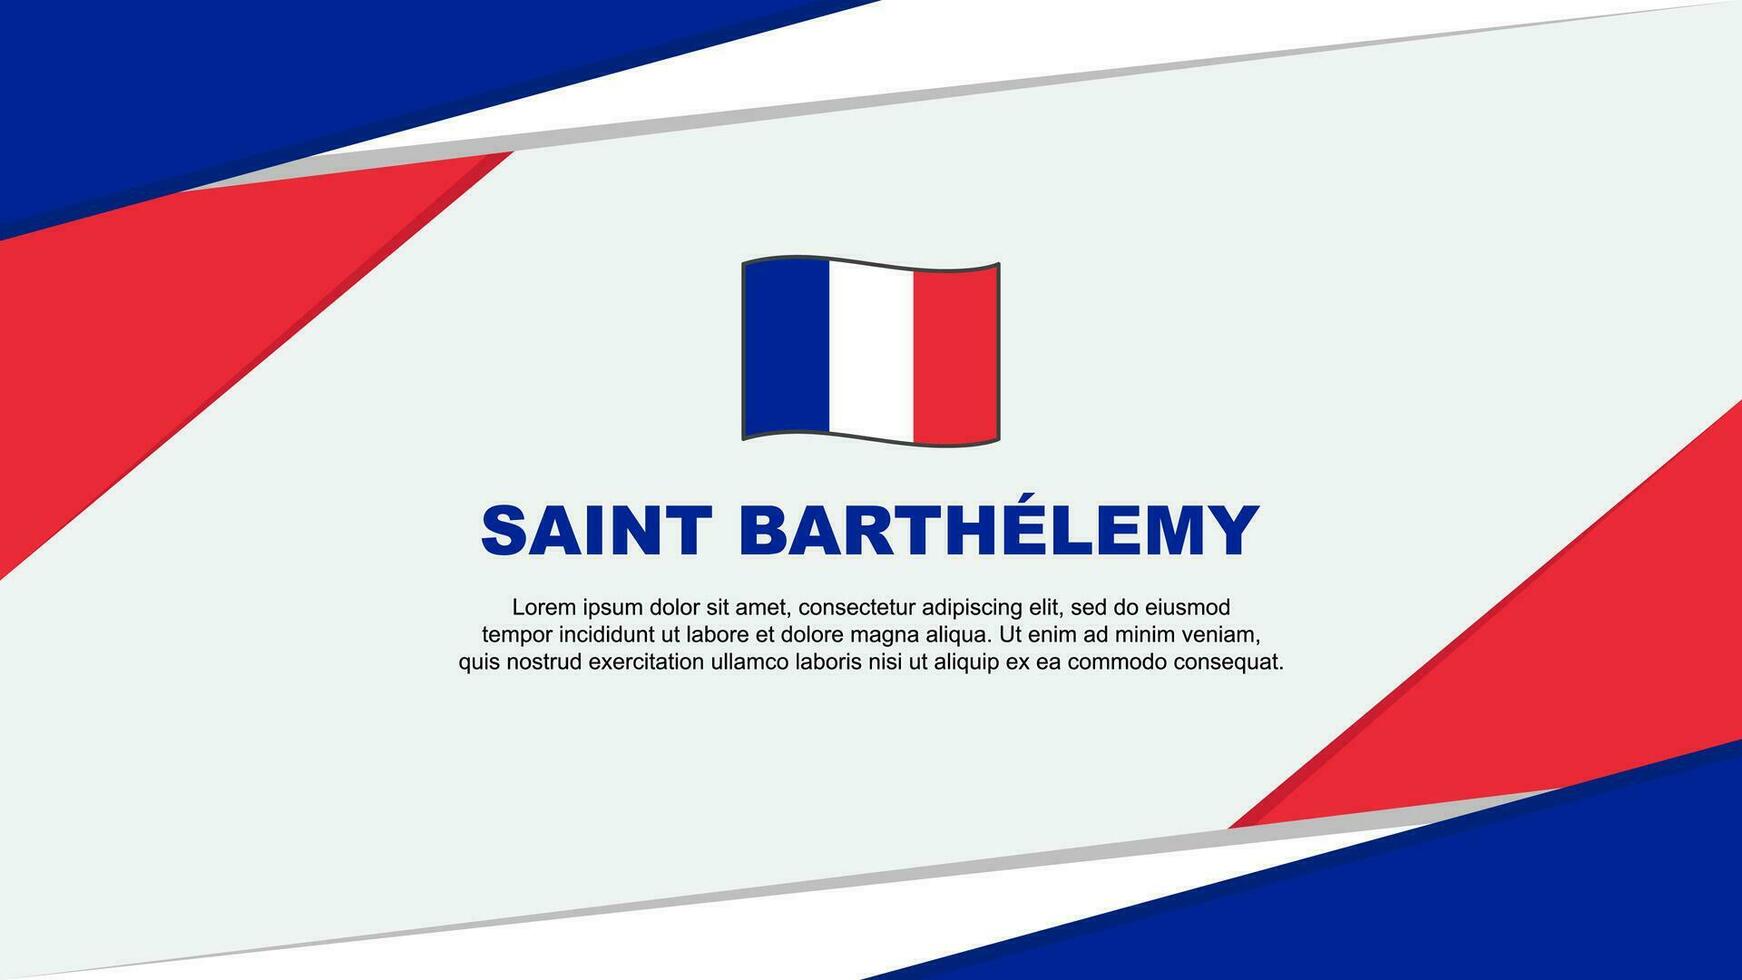 Saint Barthelemy Flag Abstract Background Design Template. Saint Barthelemy Independence Day Banner Cartoon Vector Illustration